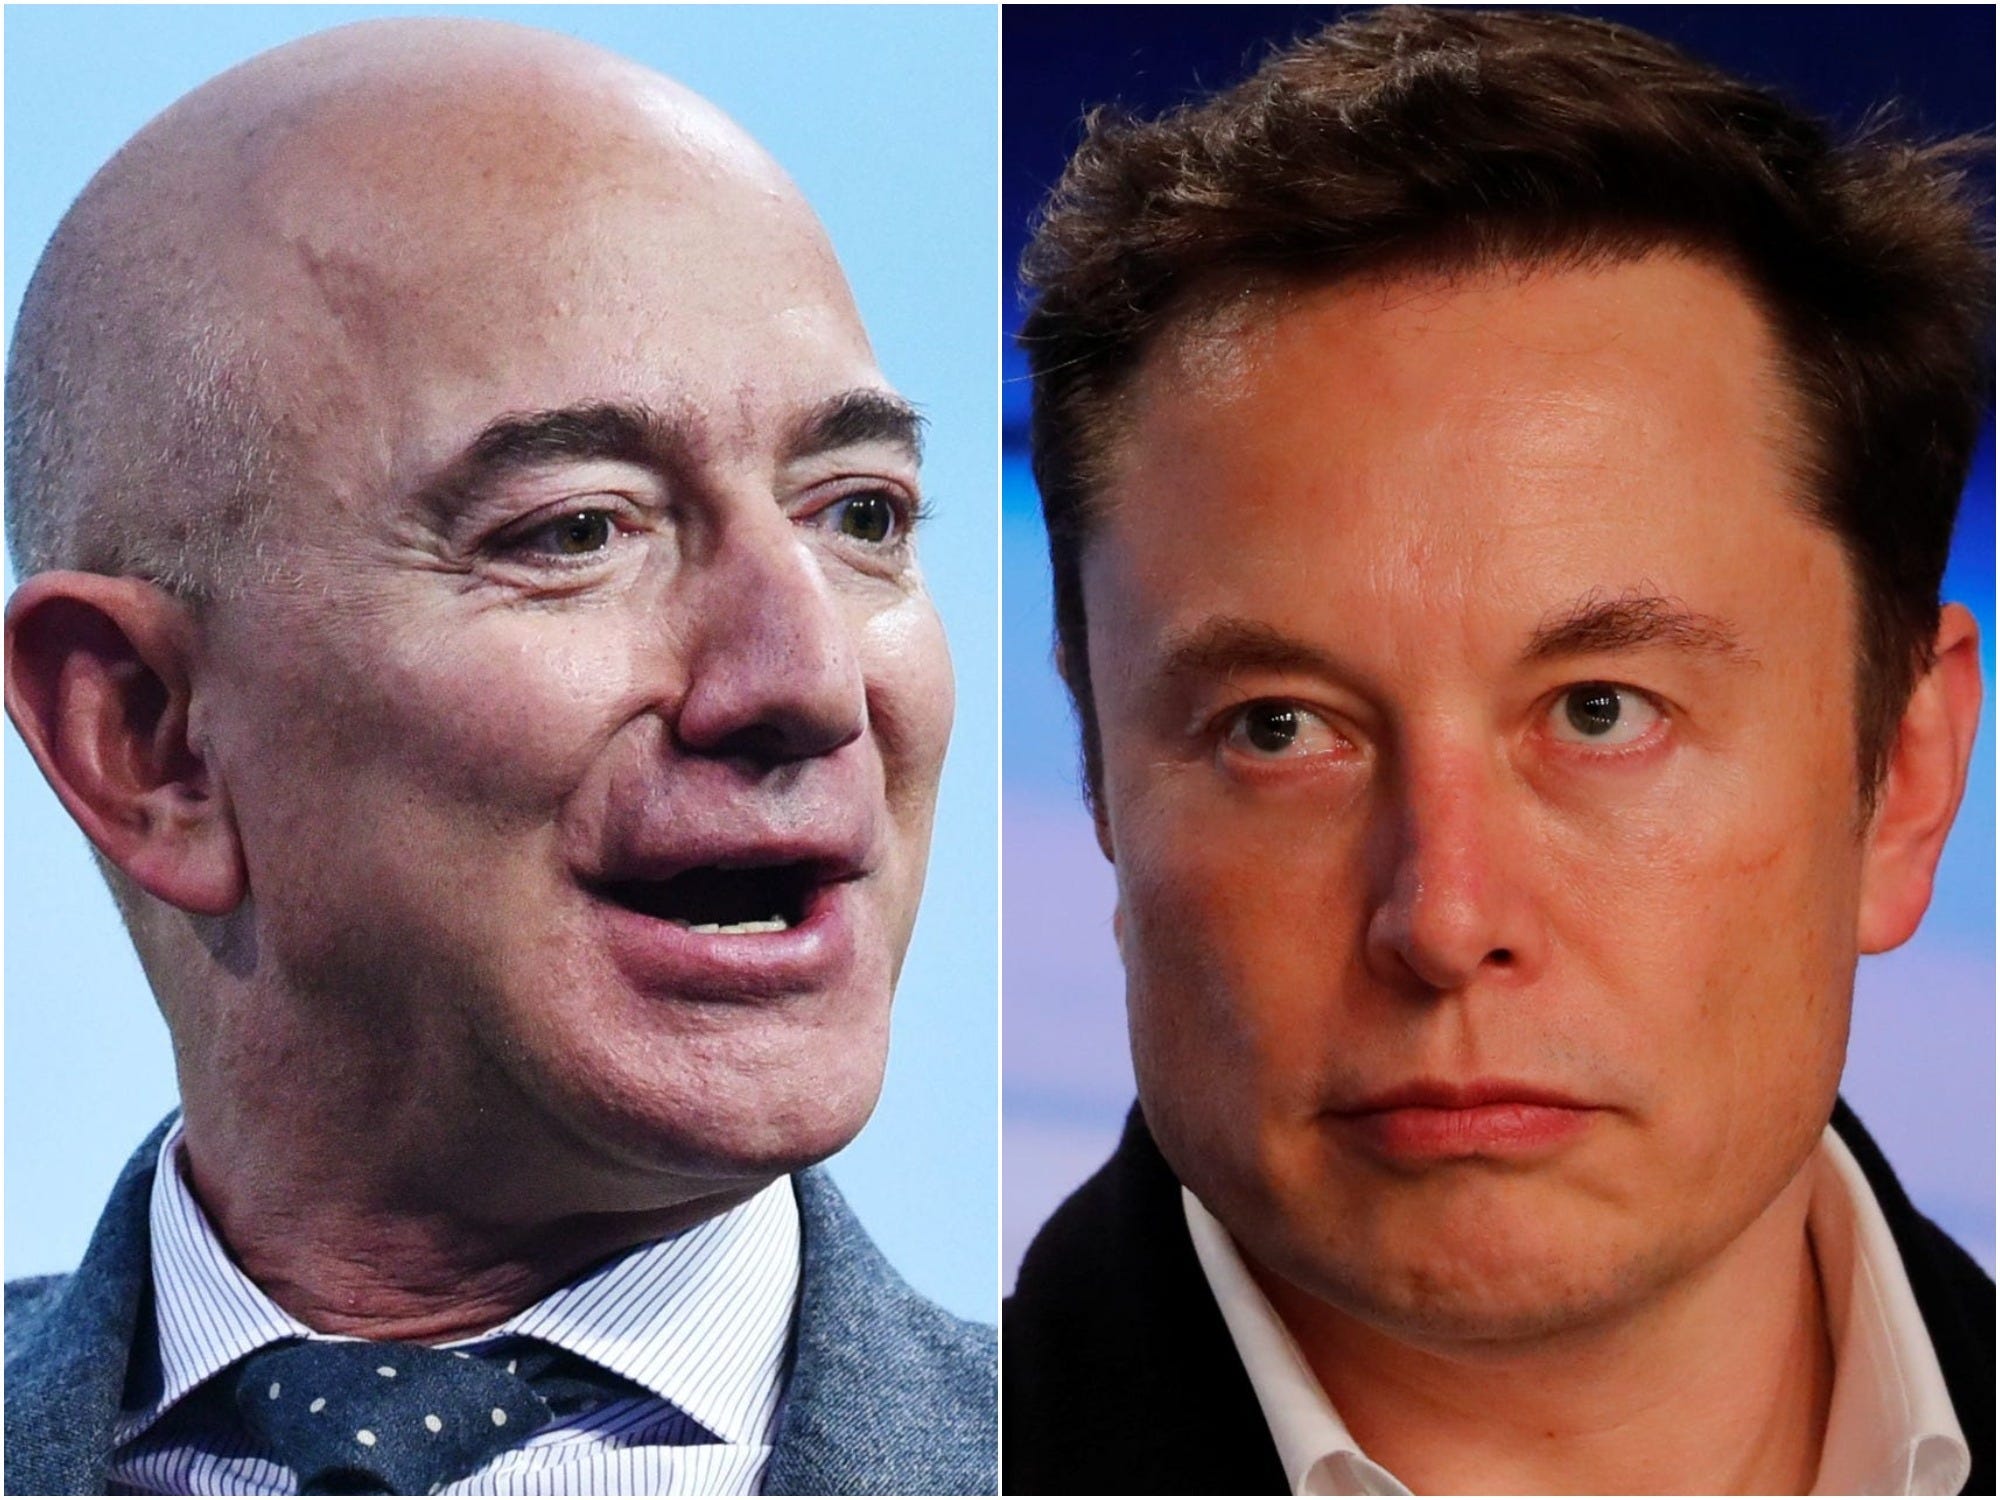 Side-by-side close-up photos of Jeff Bezos Elon Musk